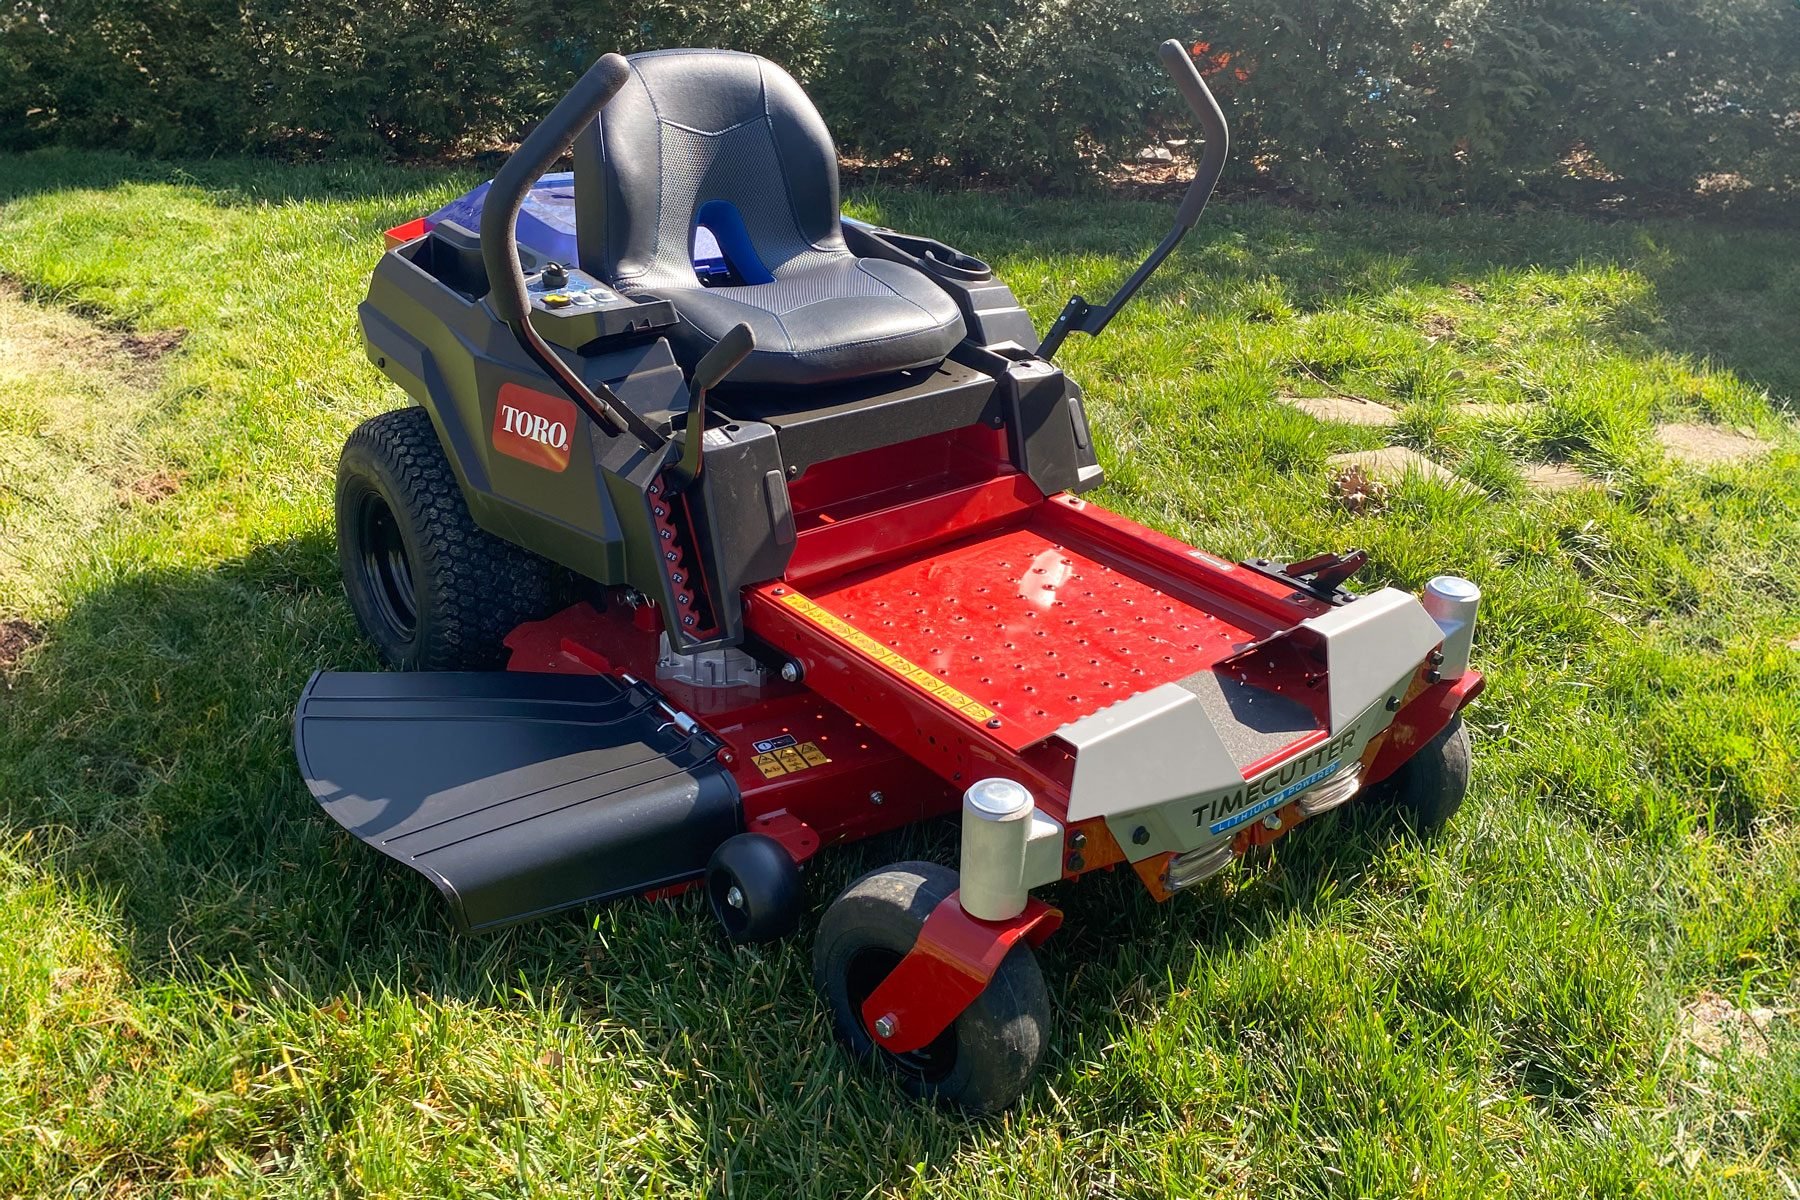 Toro Zero-Turn Mower Review: We Tried Toro's First Electric Riding Mower and It Was Well Worth the Wait